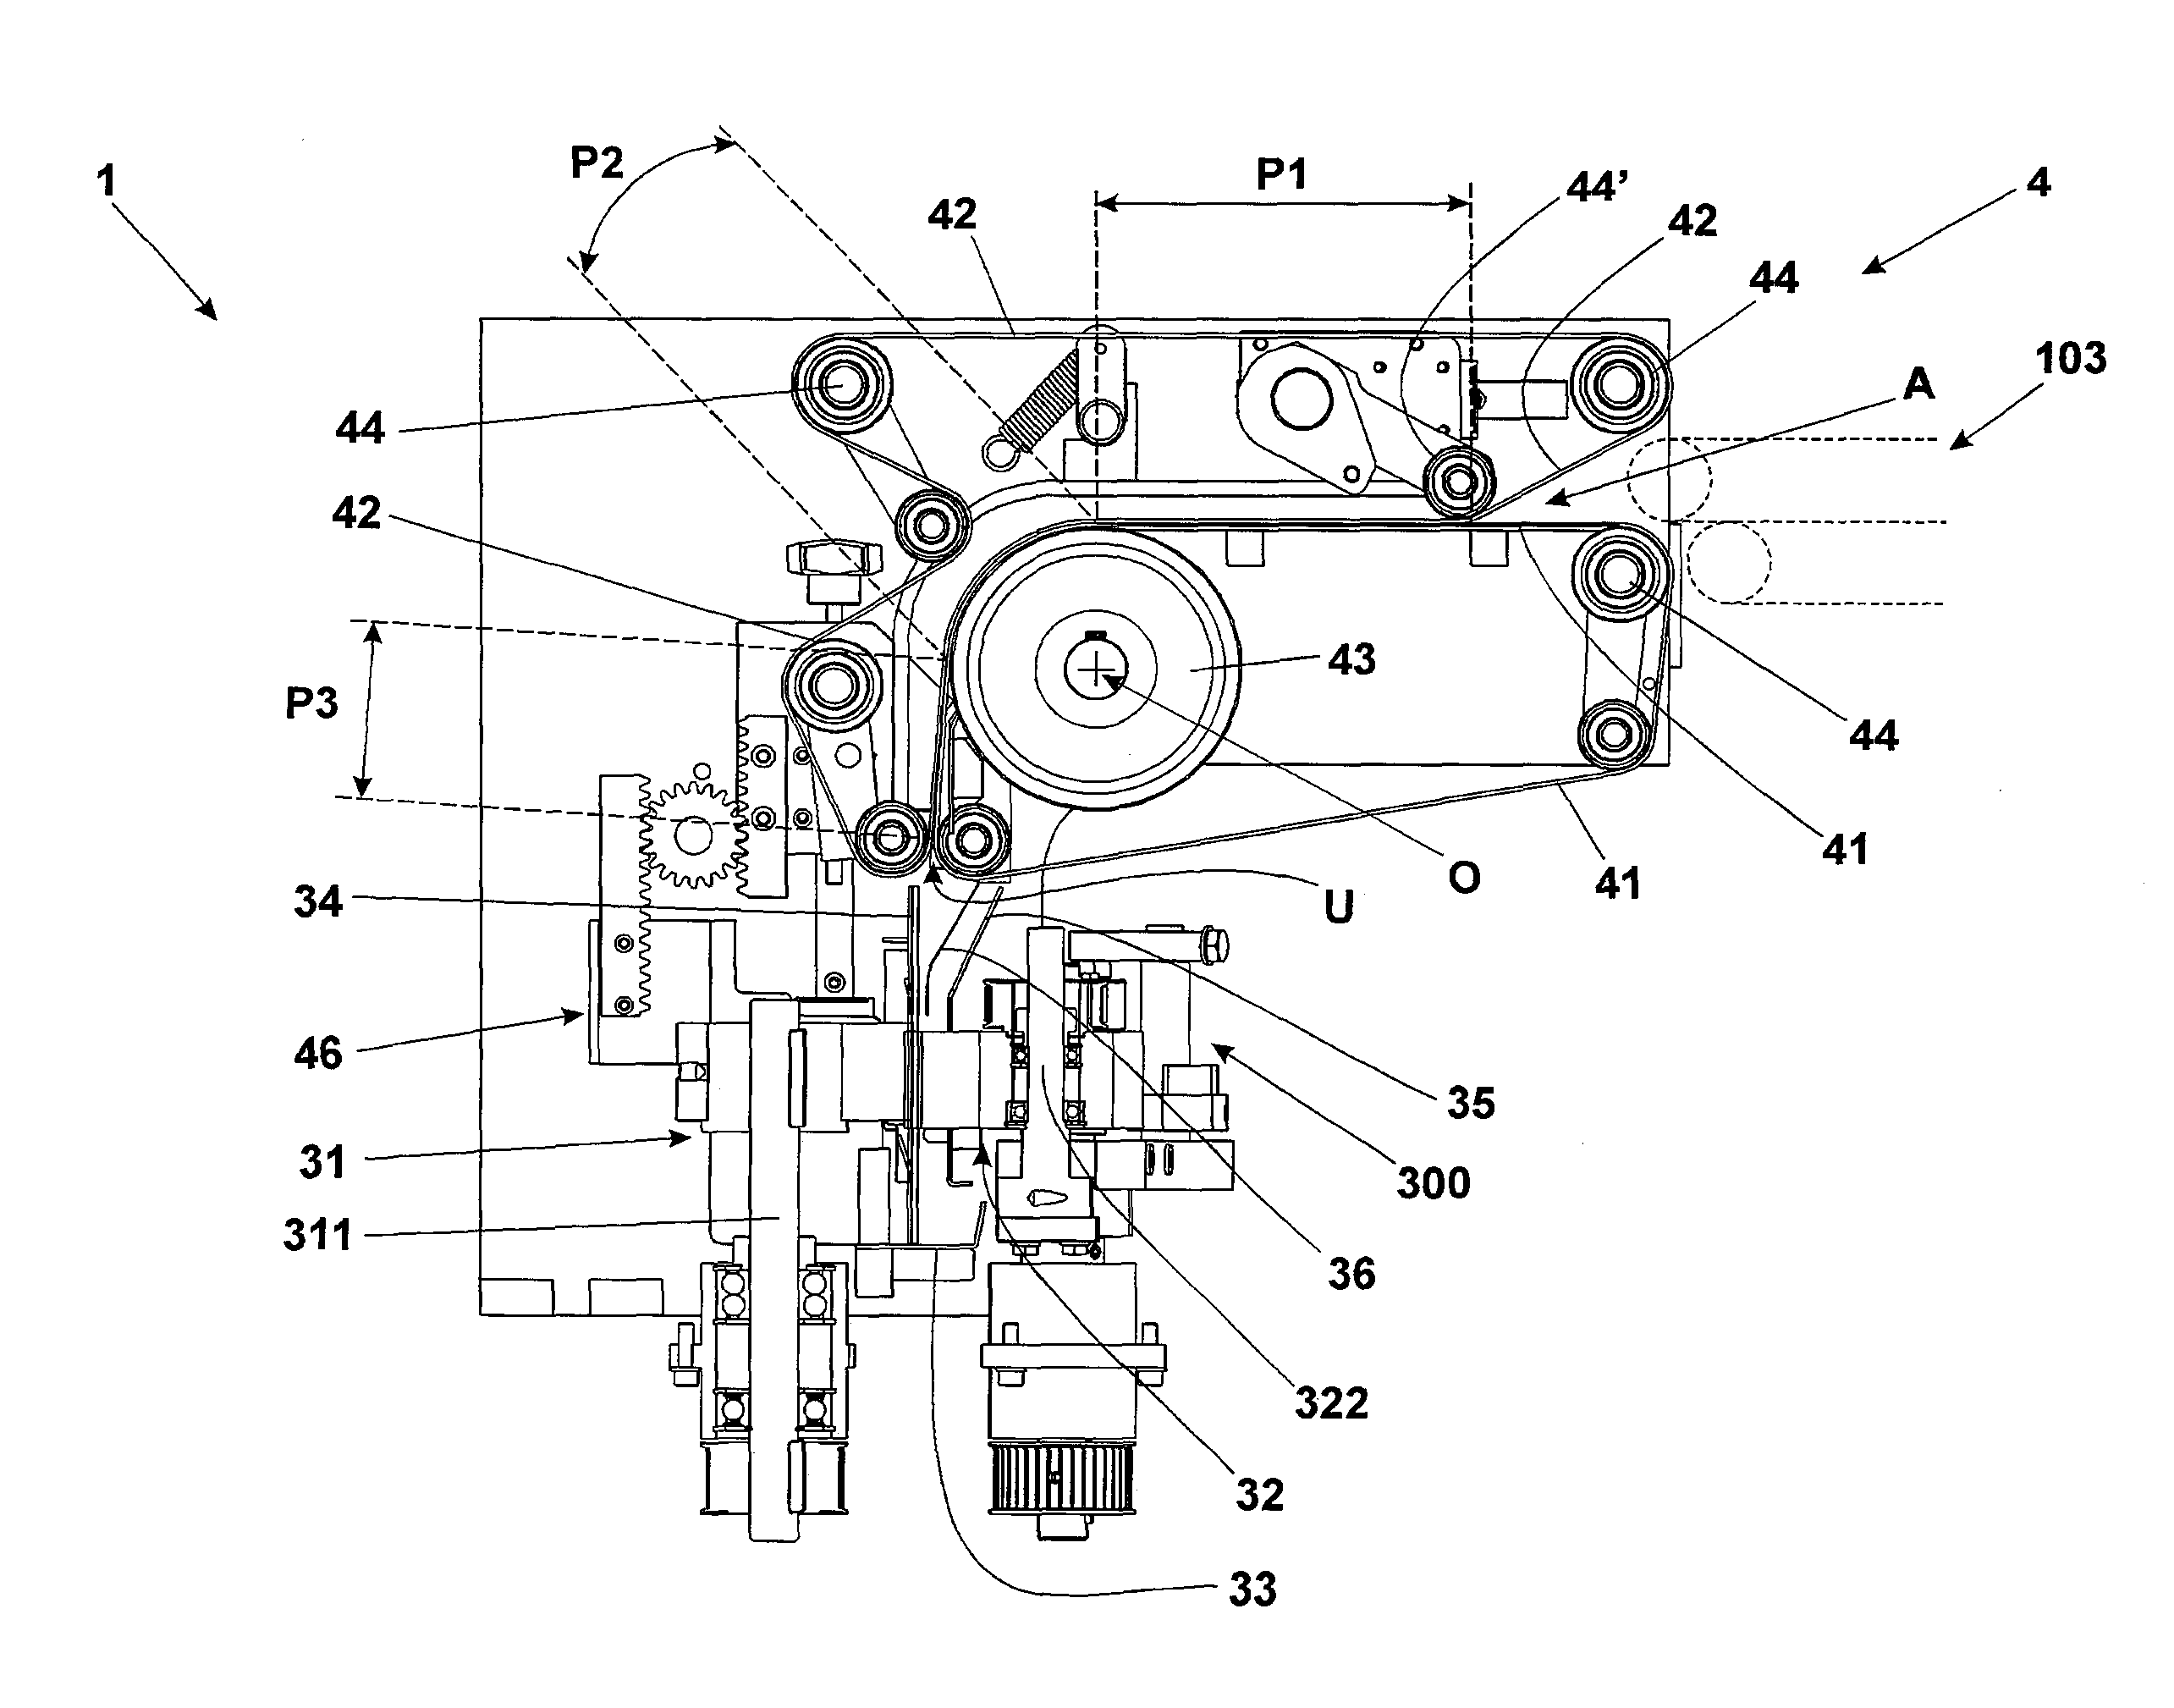 Apparatus for changing an advancement direction of piles of inserts to be stuffed in envelopes